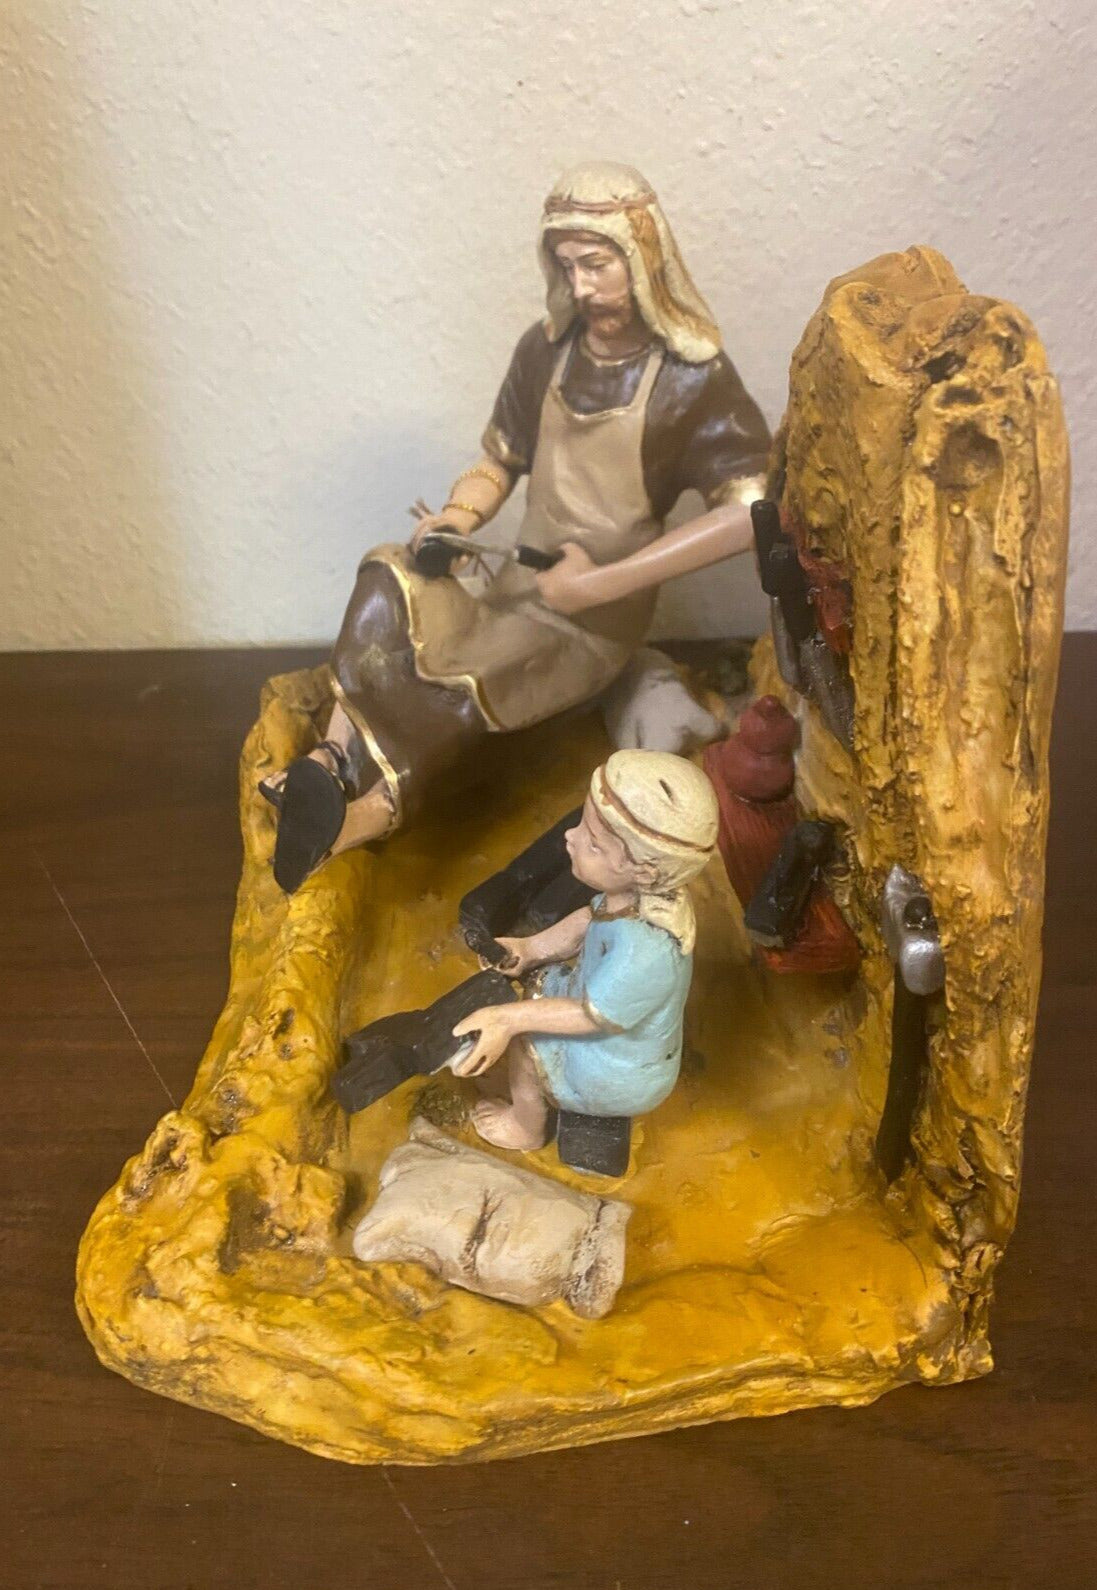 Saint Joseph the Worker with Child Jesus  New from Colombia - Bob and Penny Lord